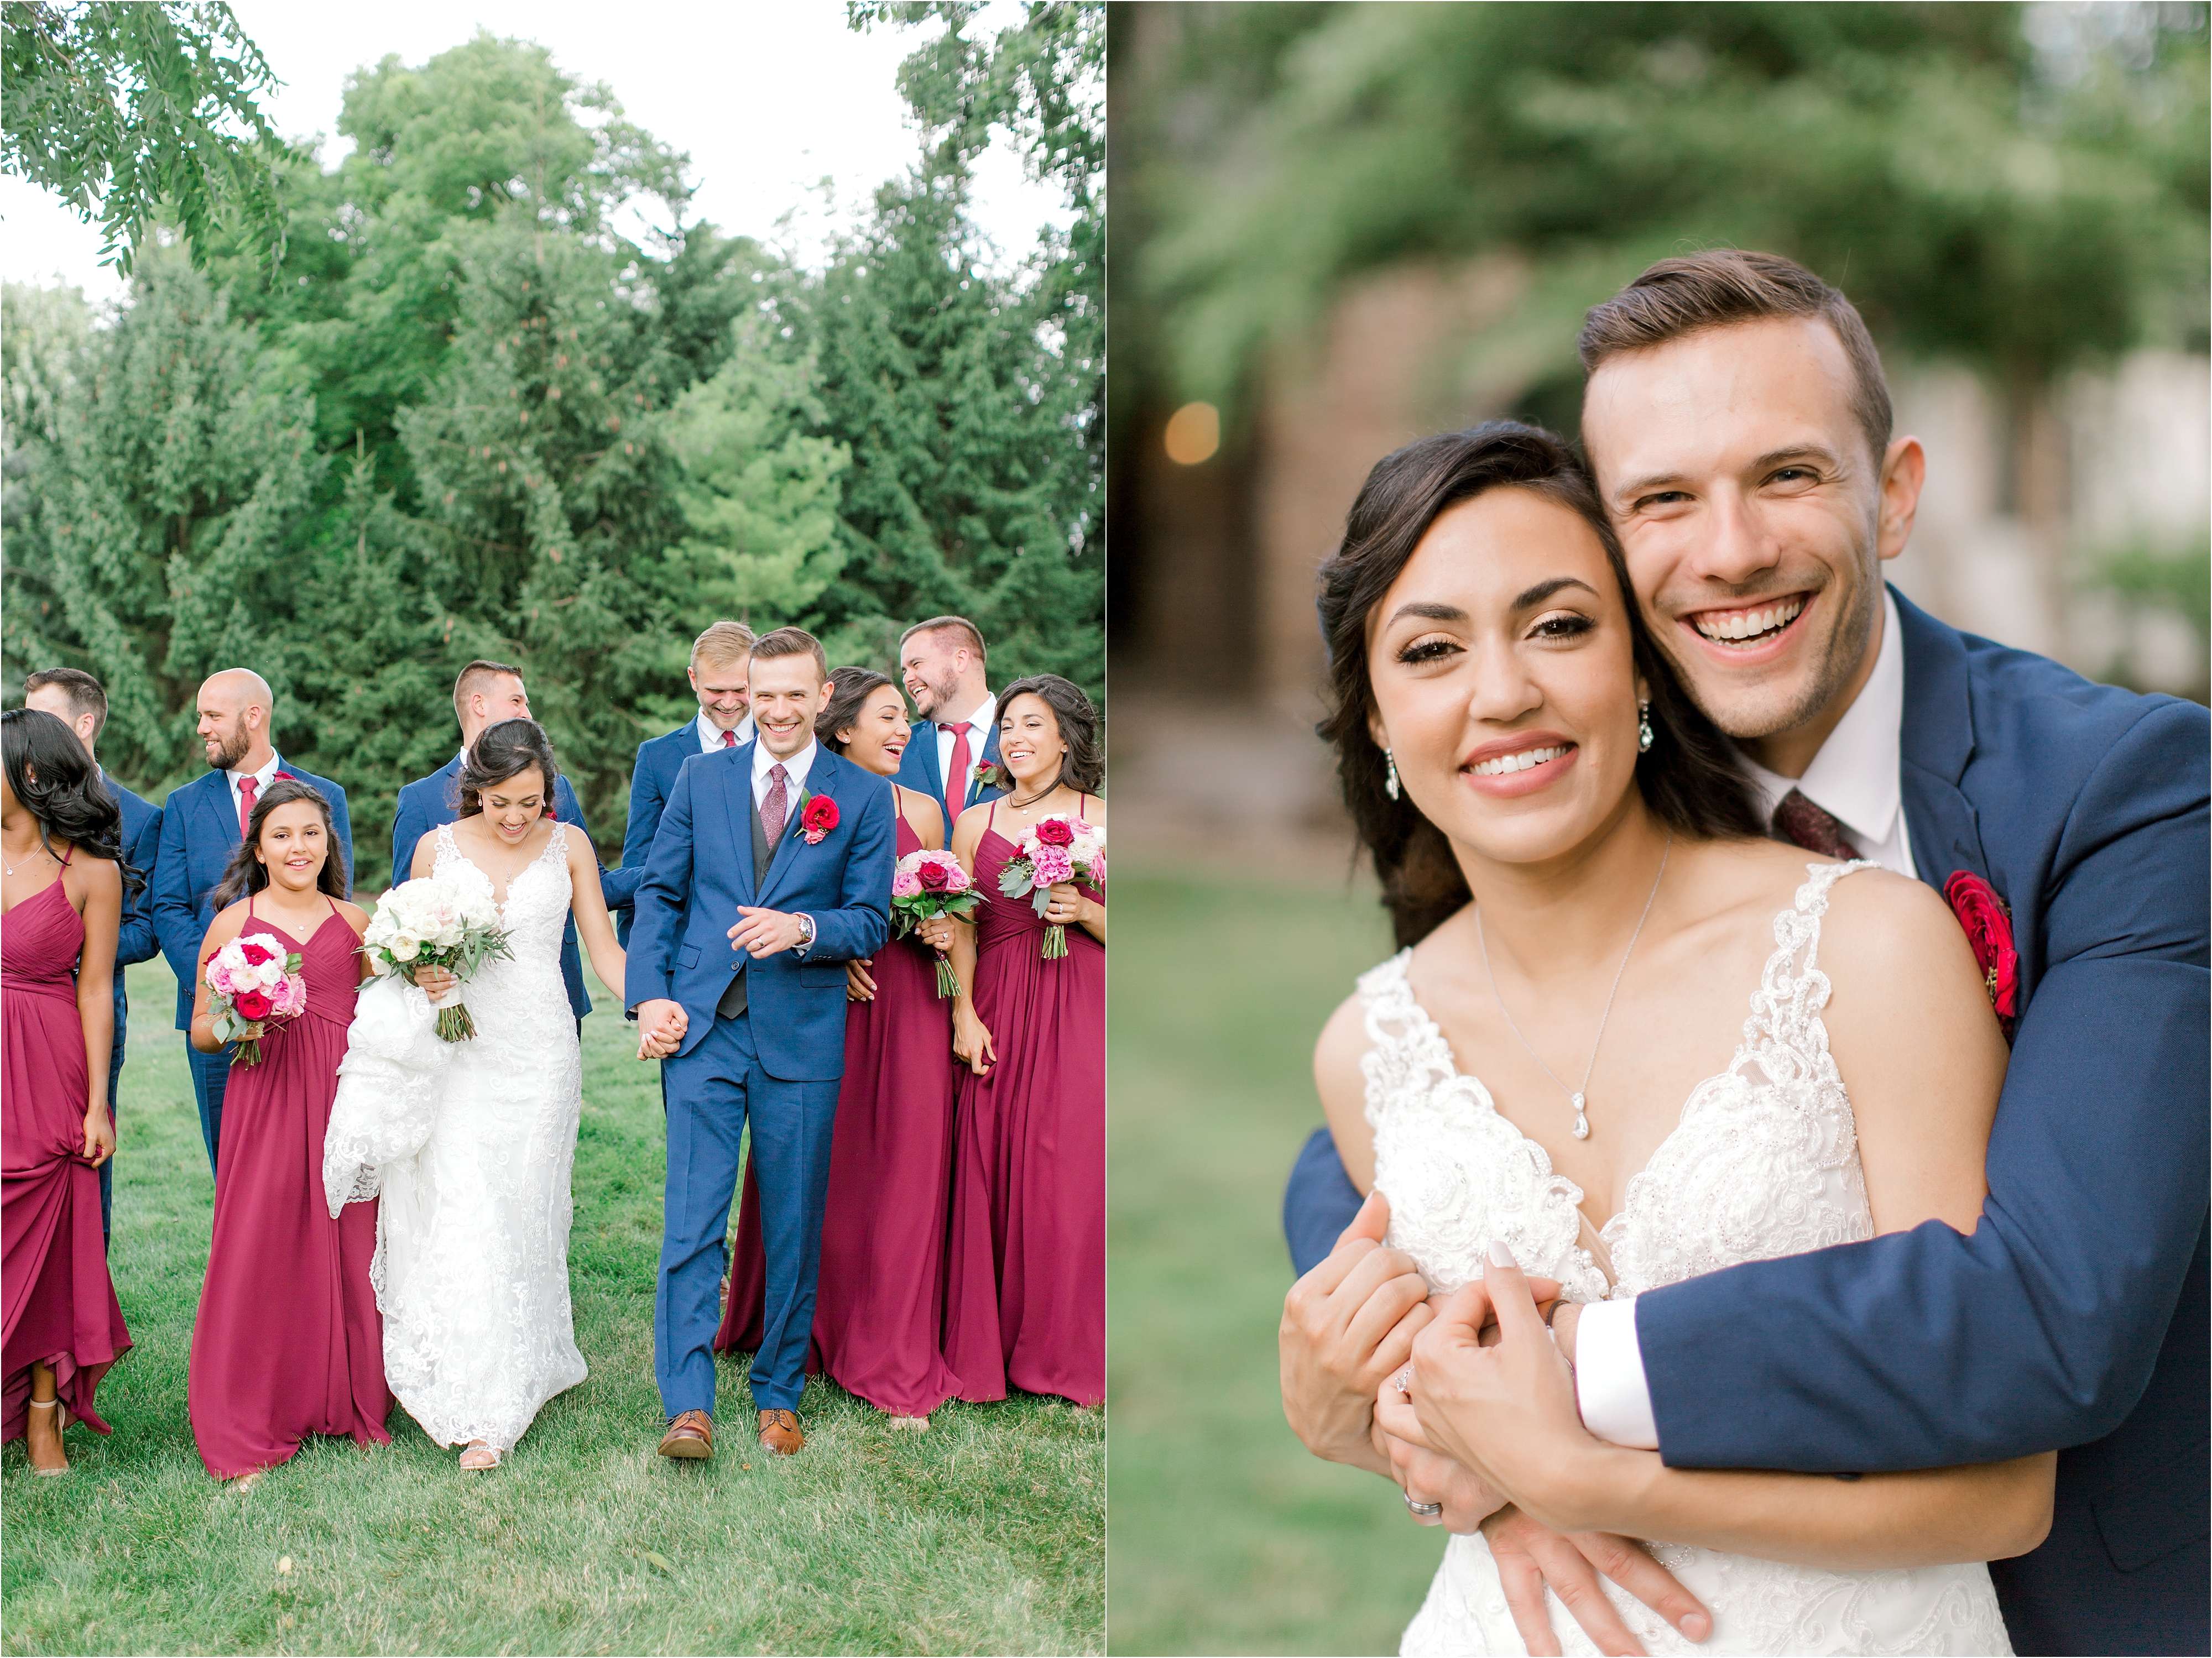 blue and wine red wedding colors at cleveland wedding 